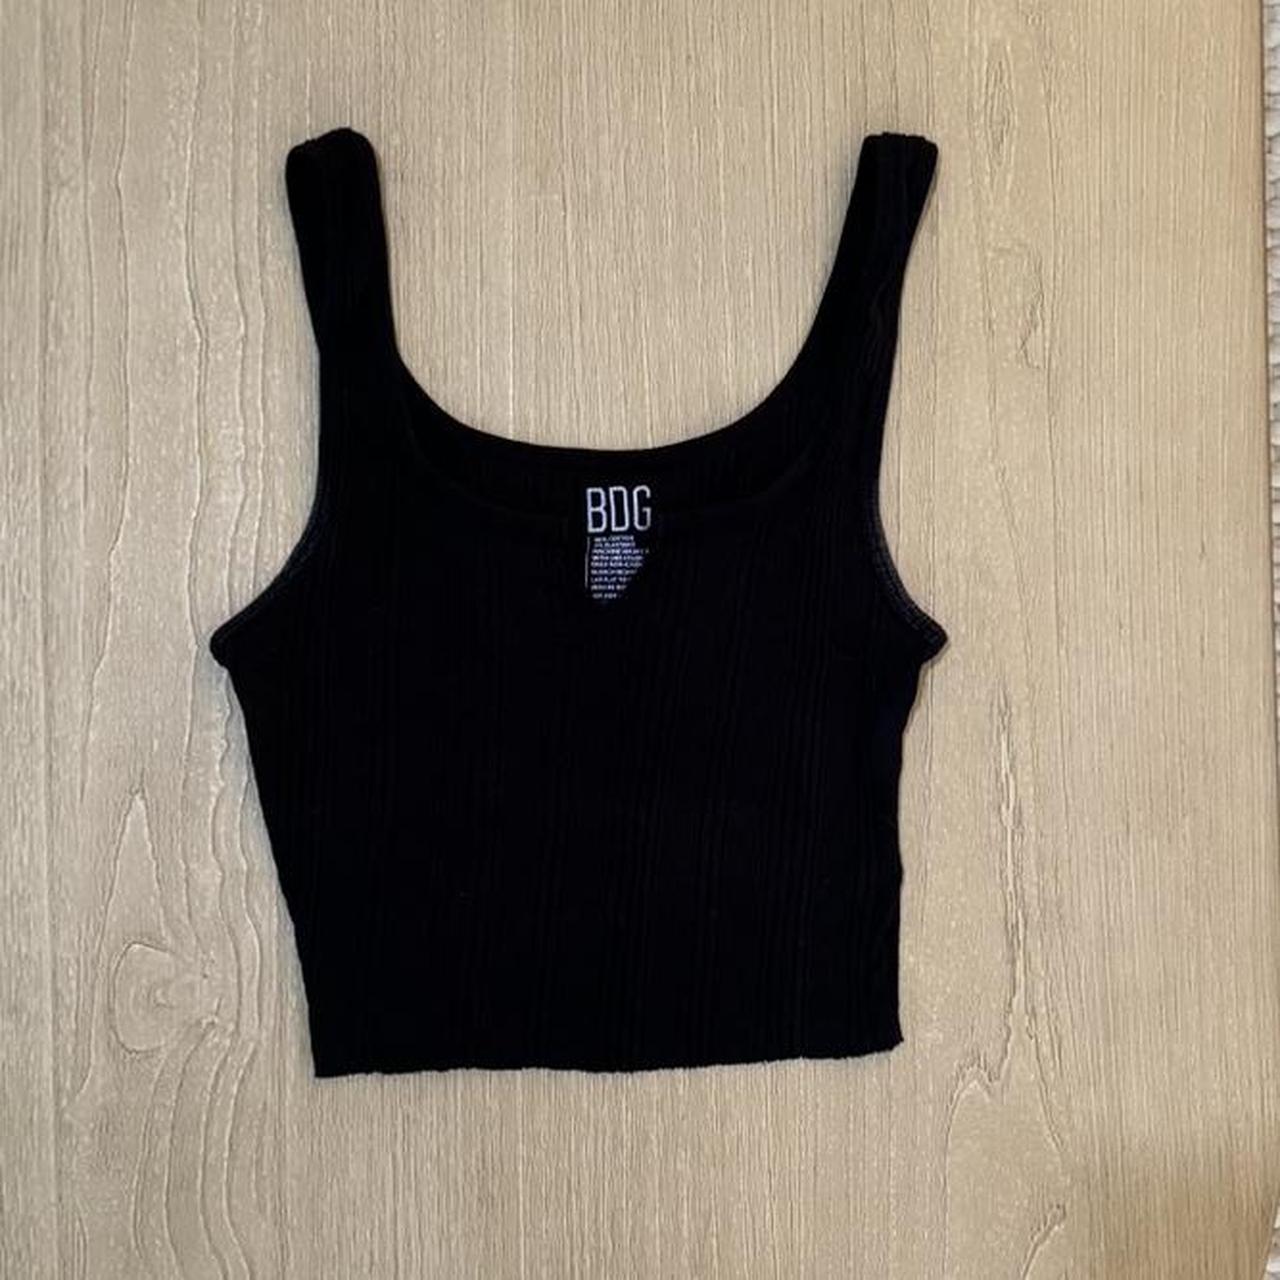 Urban Outfitters Women's Black Crop-top (4)